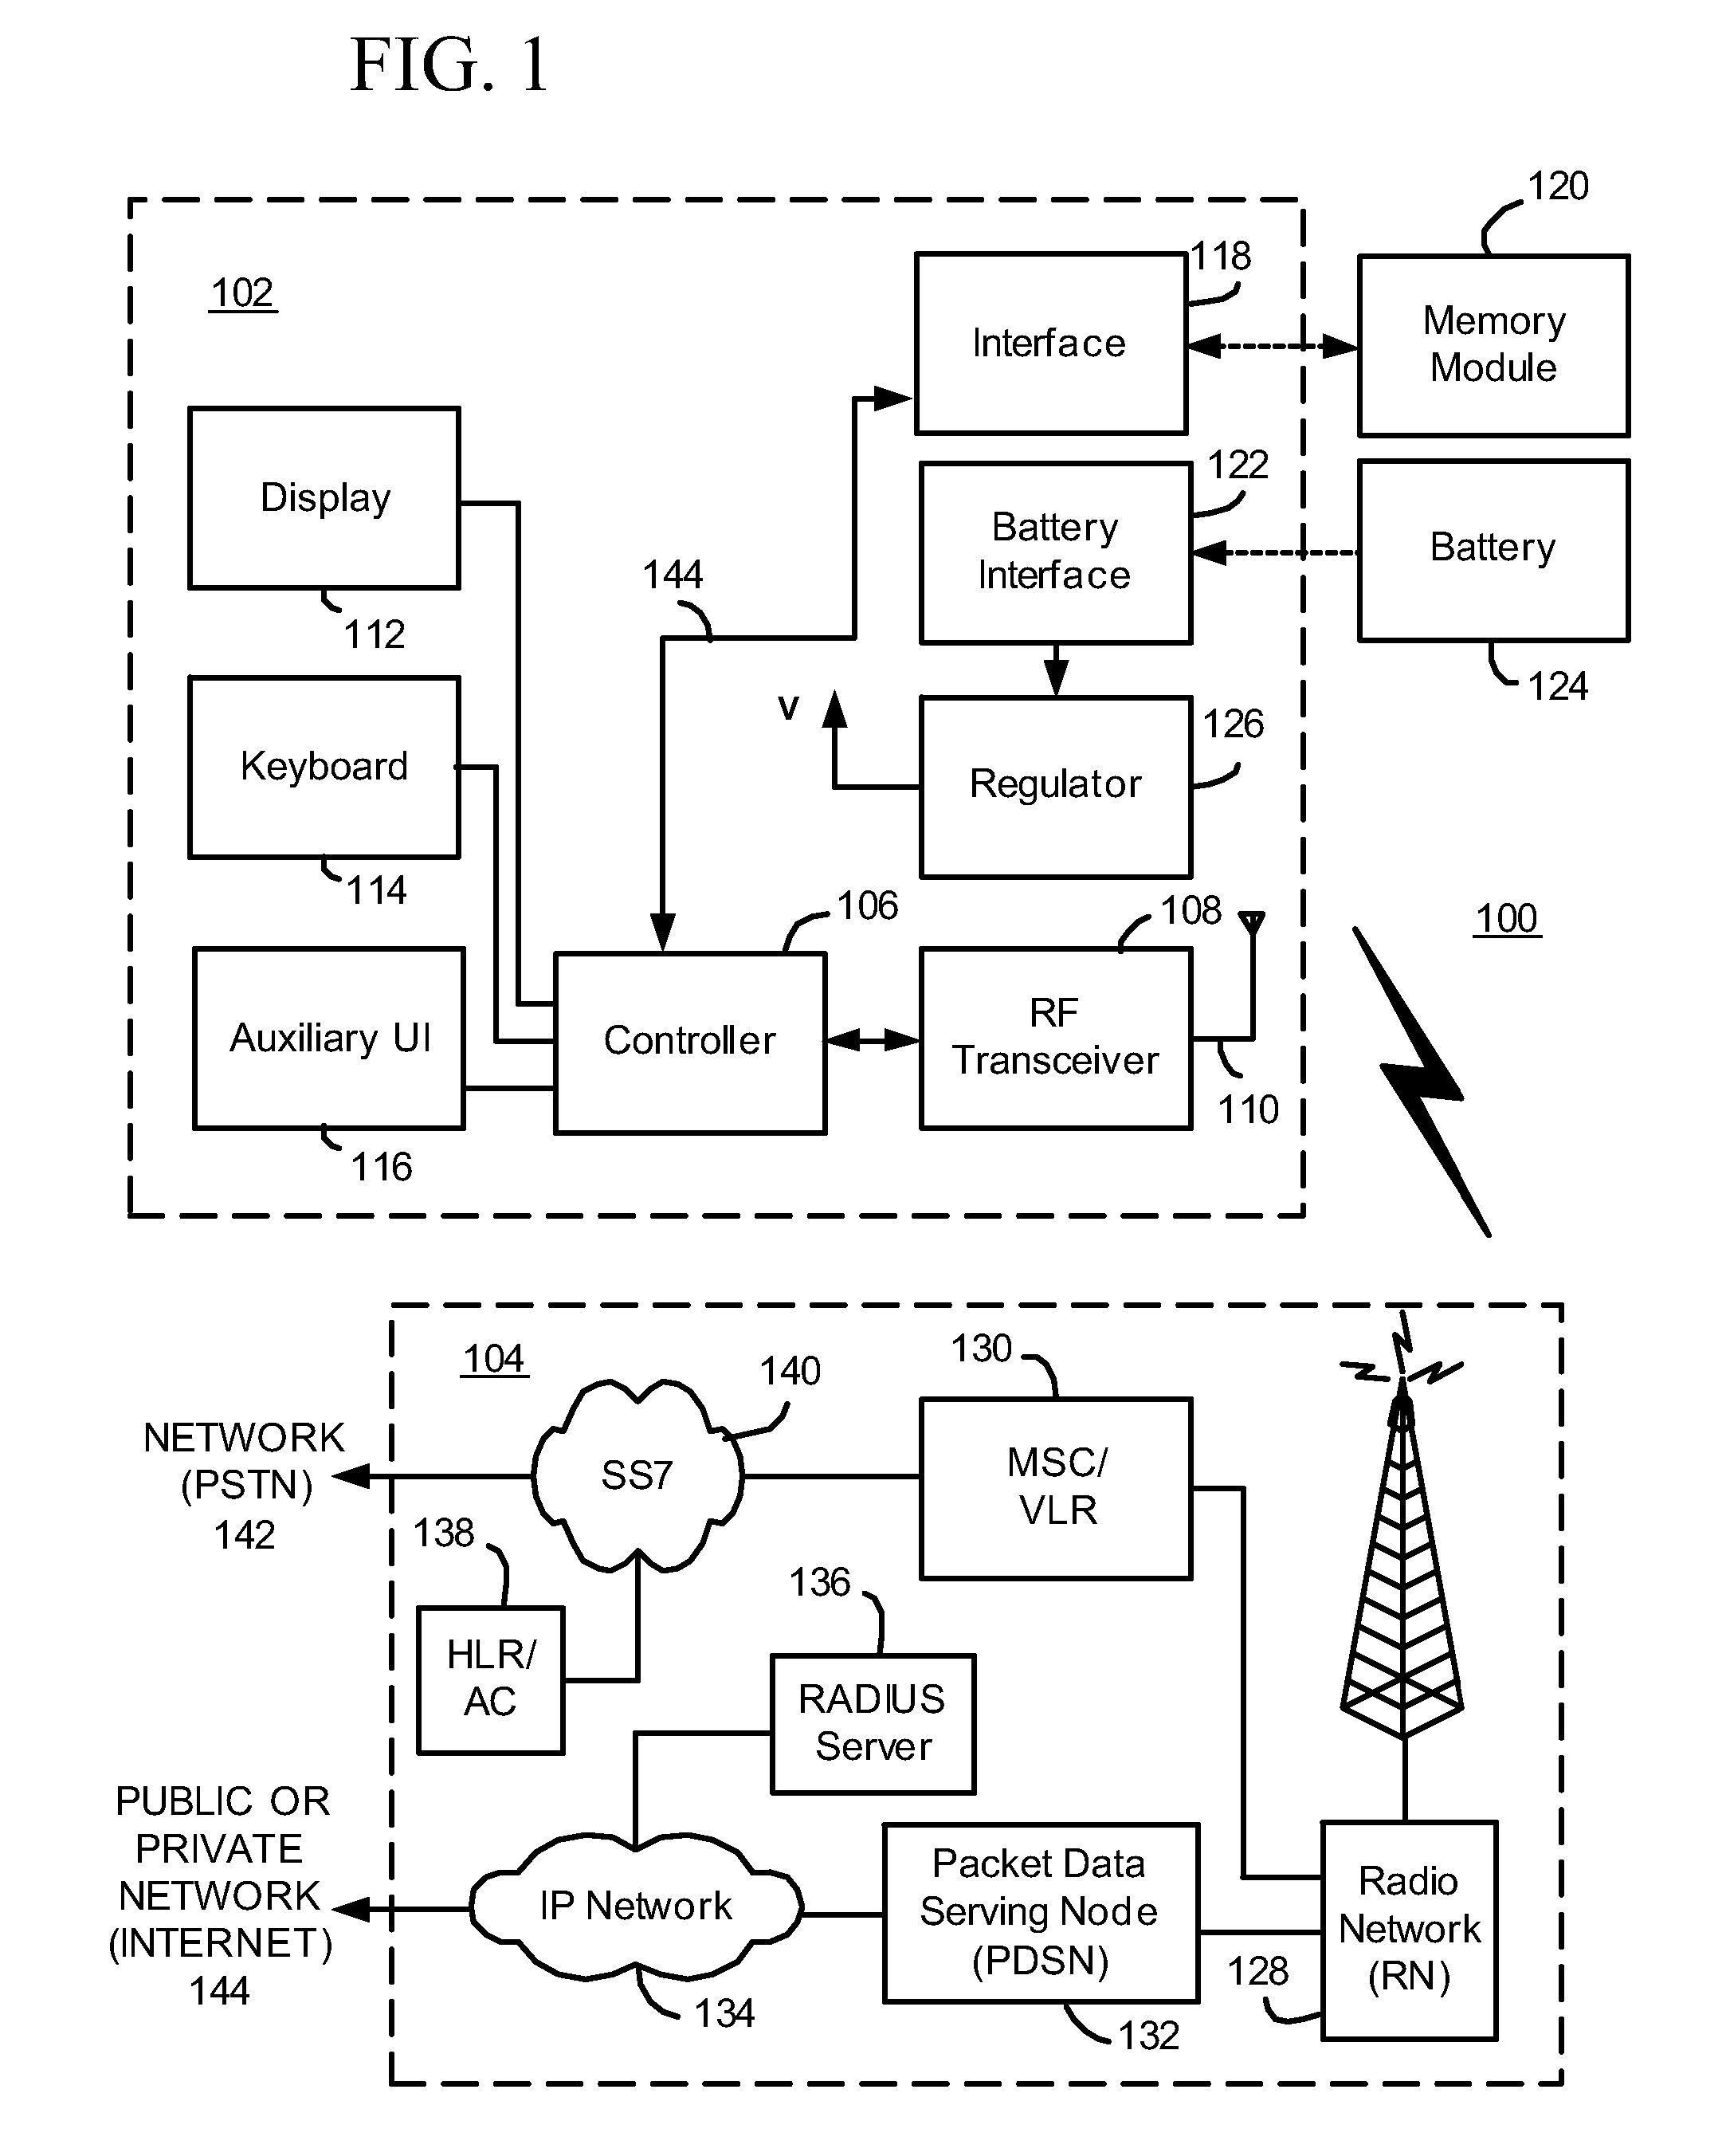 Methods and apparatus for selecting a wireless network based on quality of service (QoS) criteria associated with an application